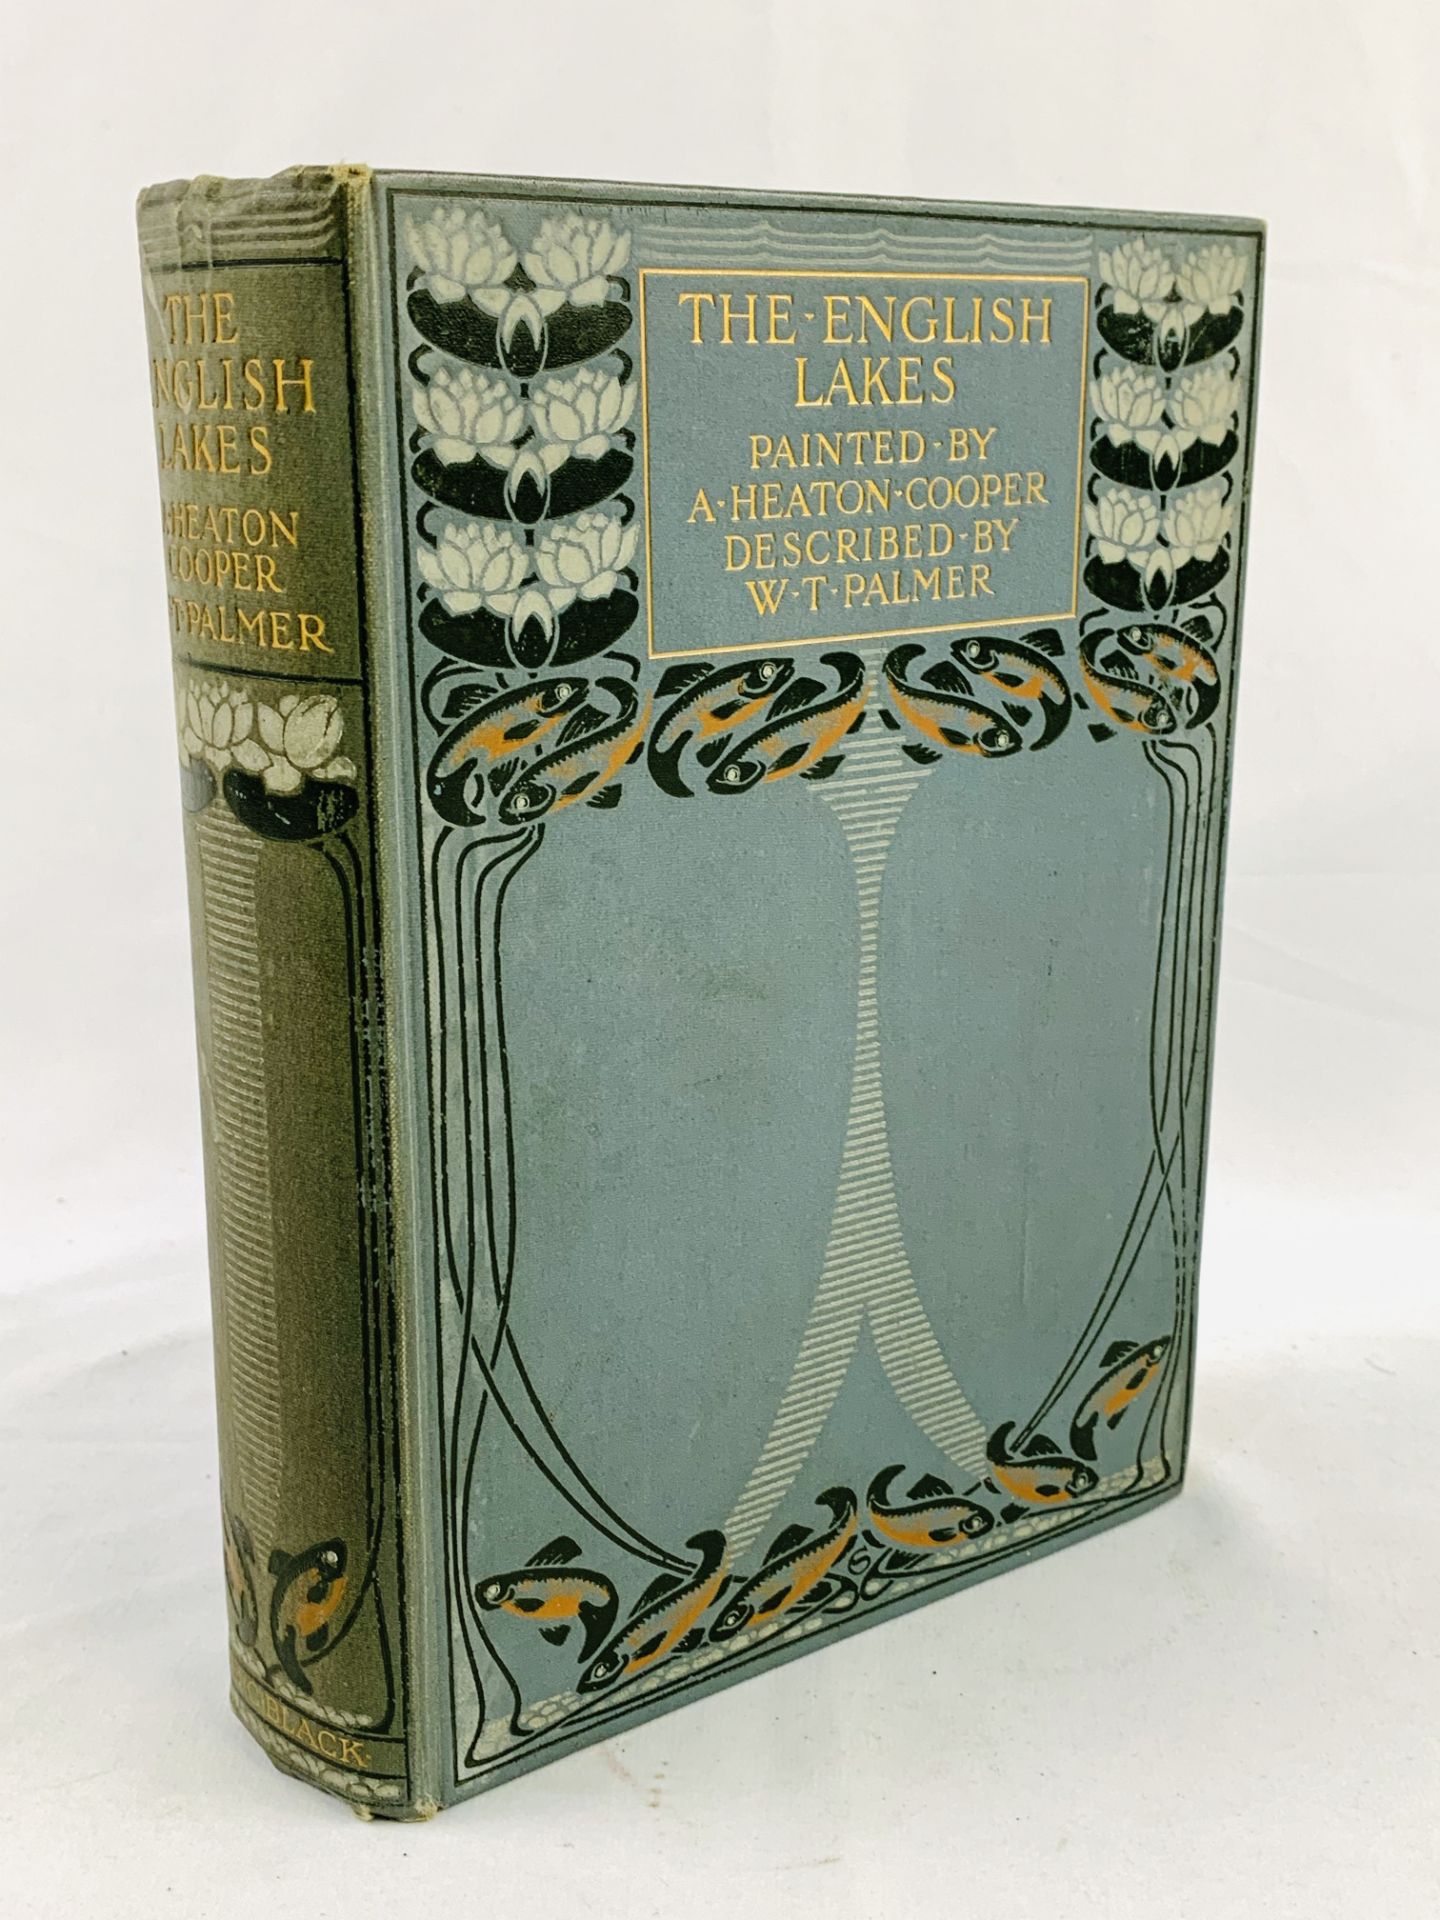 The English Lakes Painted by A. Heaton Cooper, William Palmer, 1908, 2nd edition.